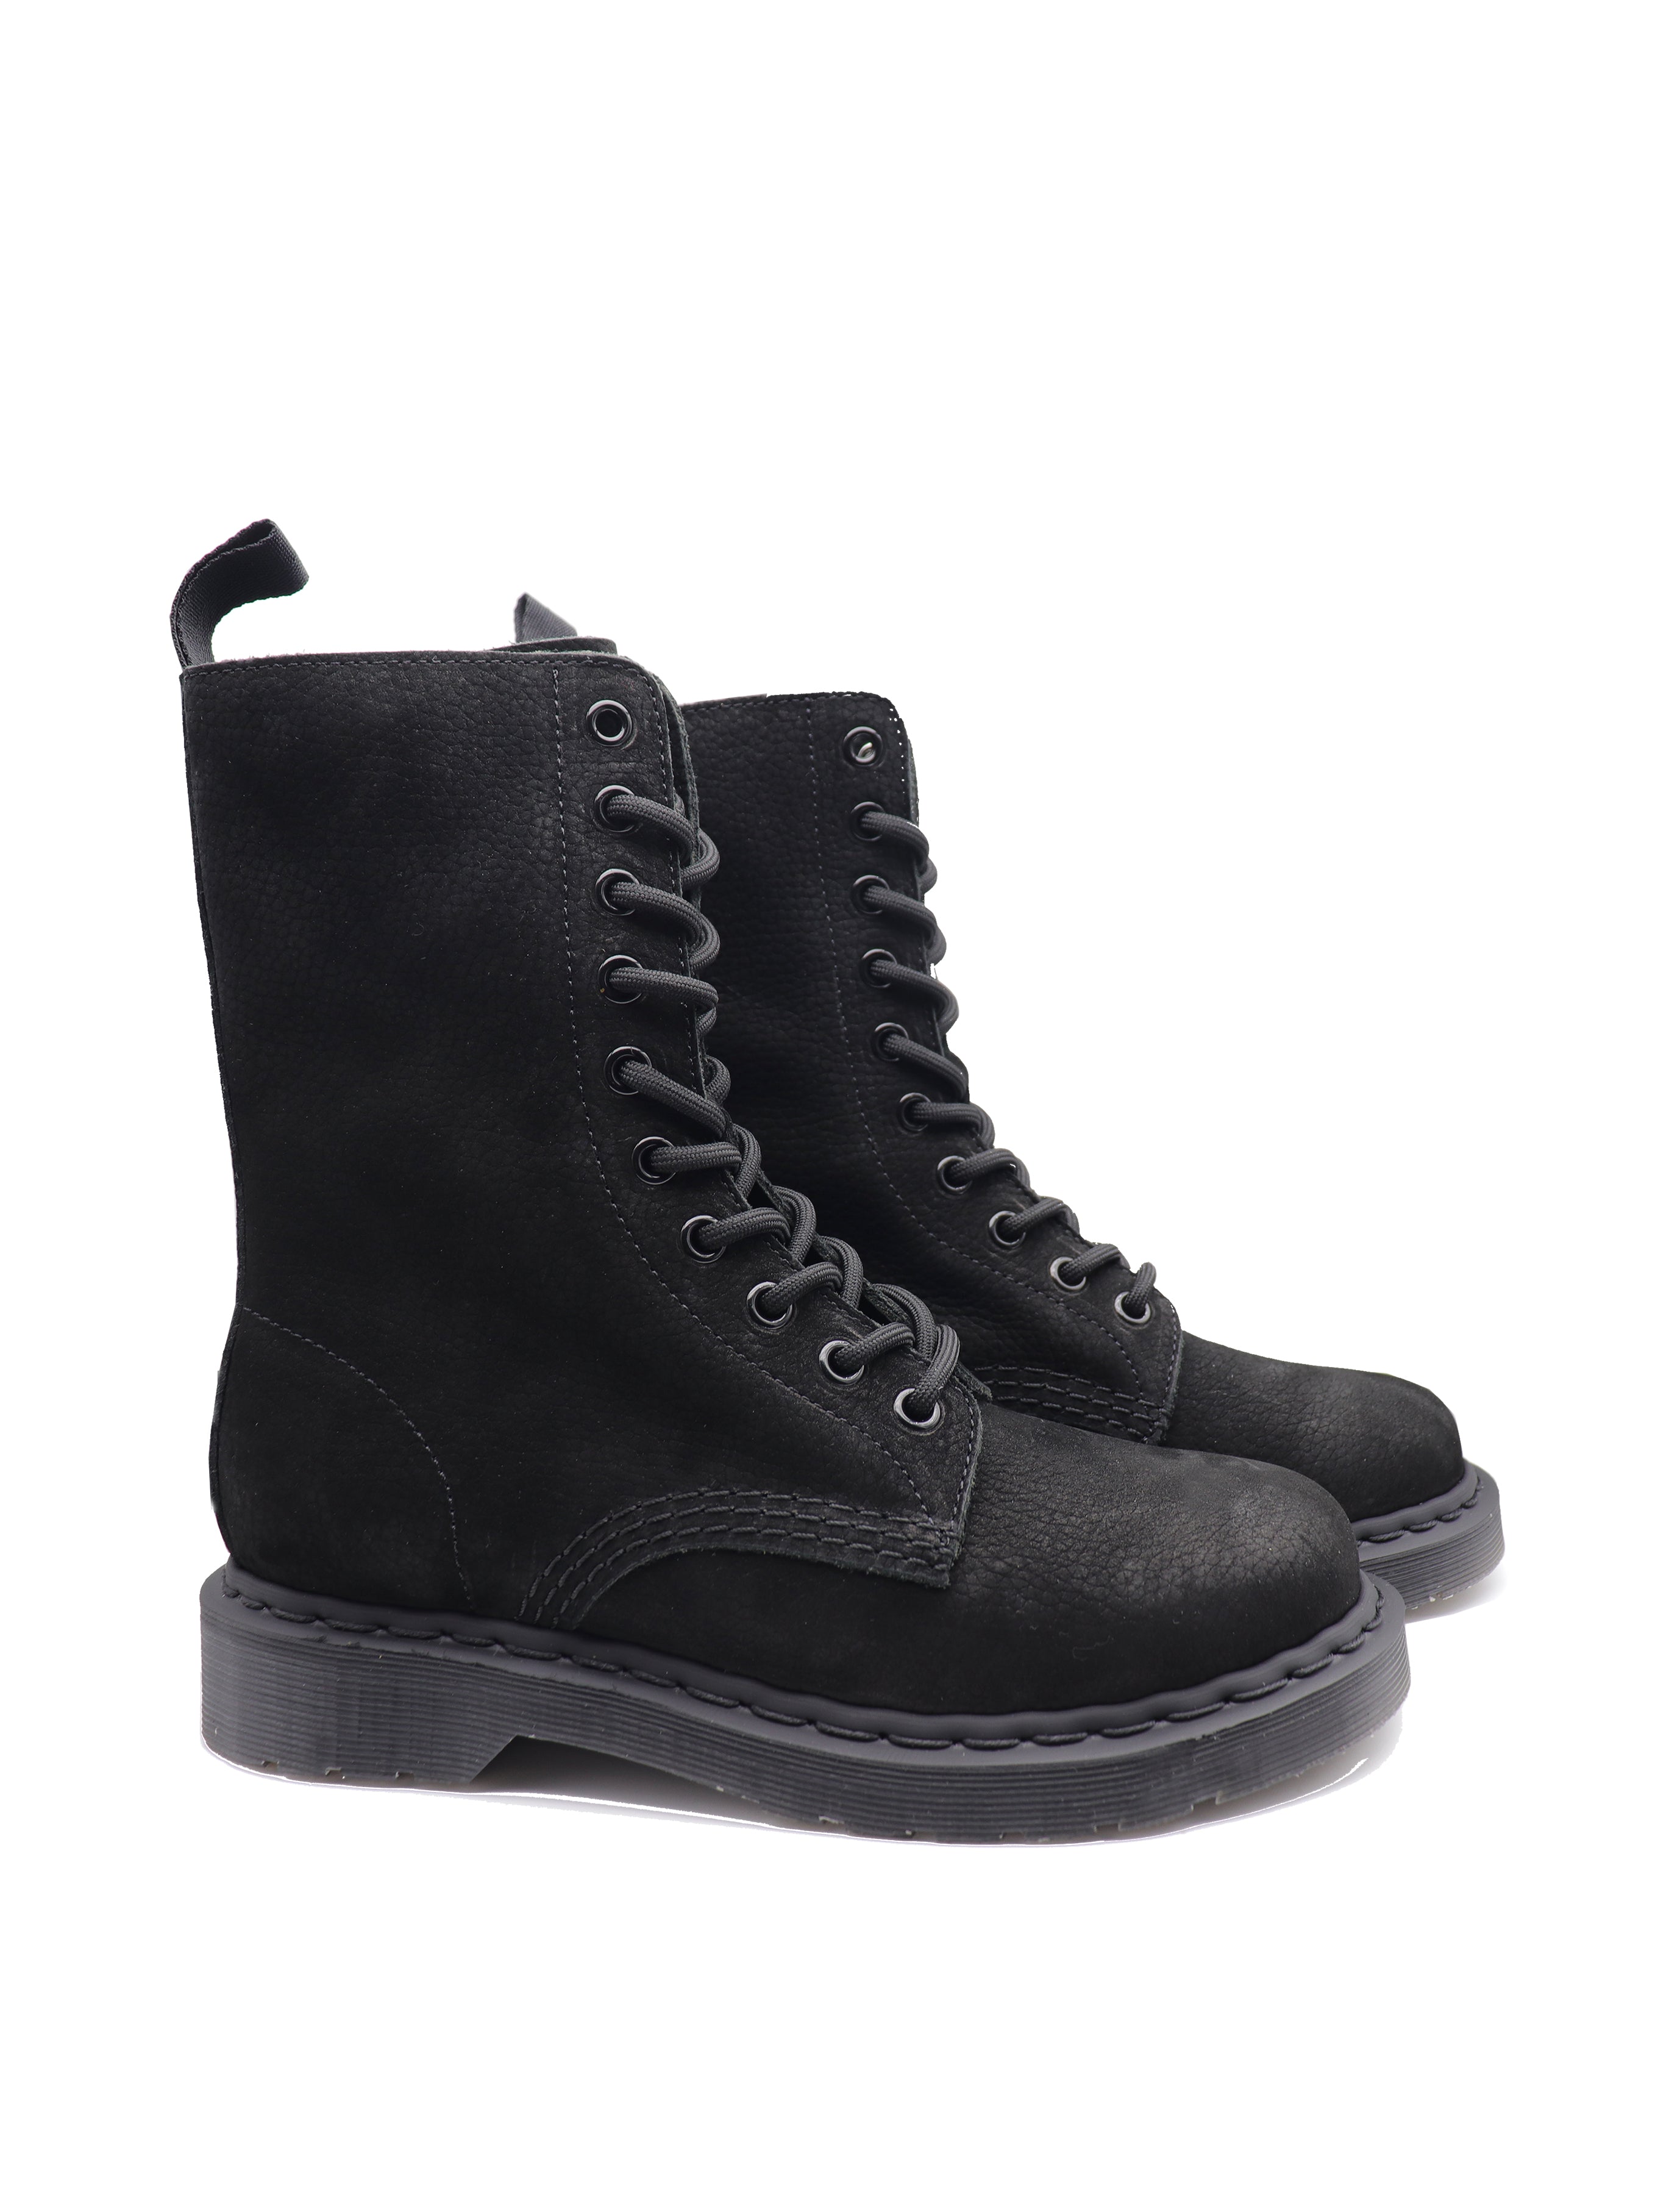 Andrea black matte First coat lychee cowhide Side Zip Lace-up ankle Boots